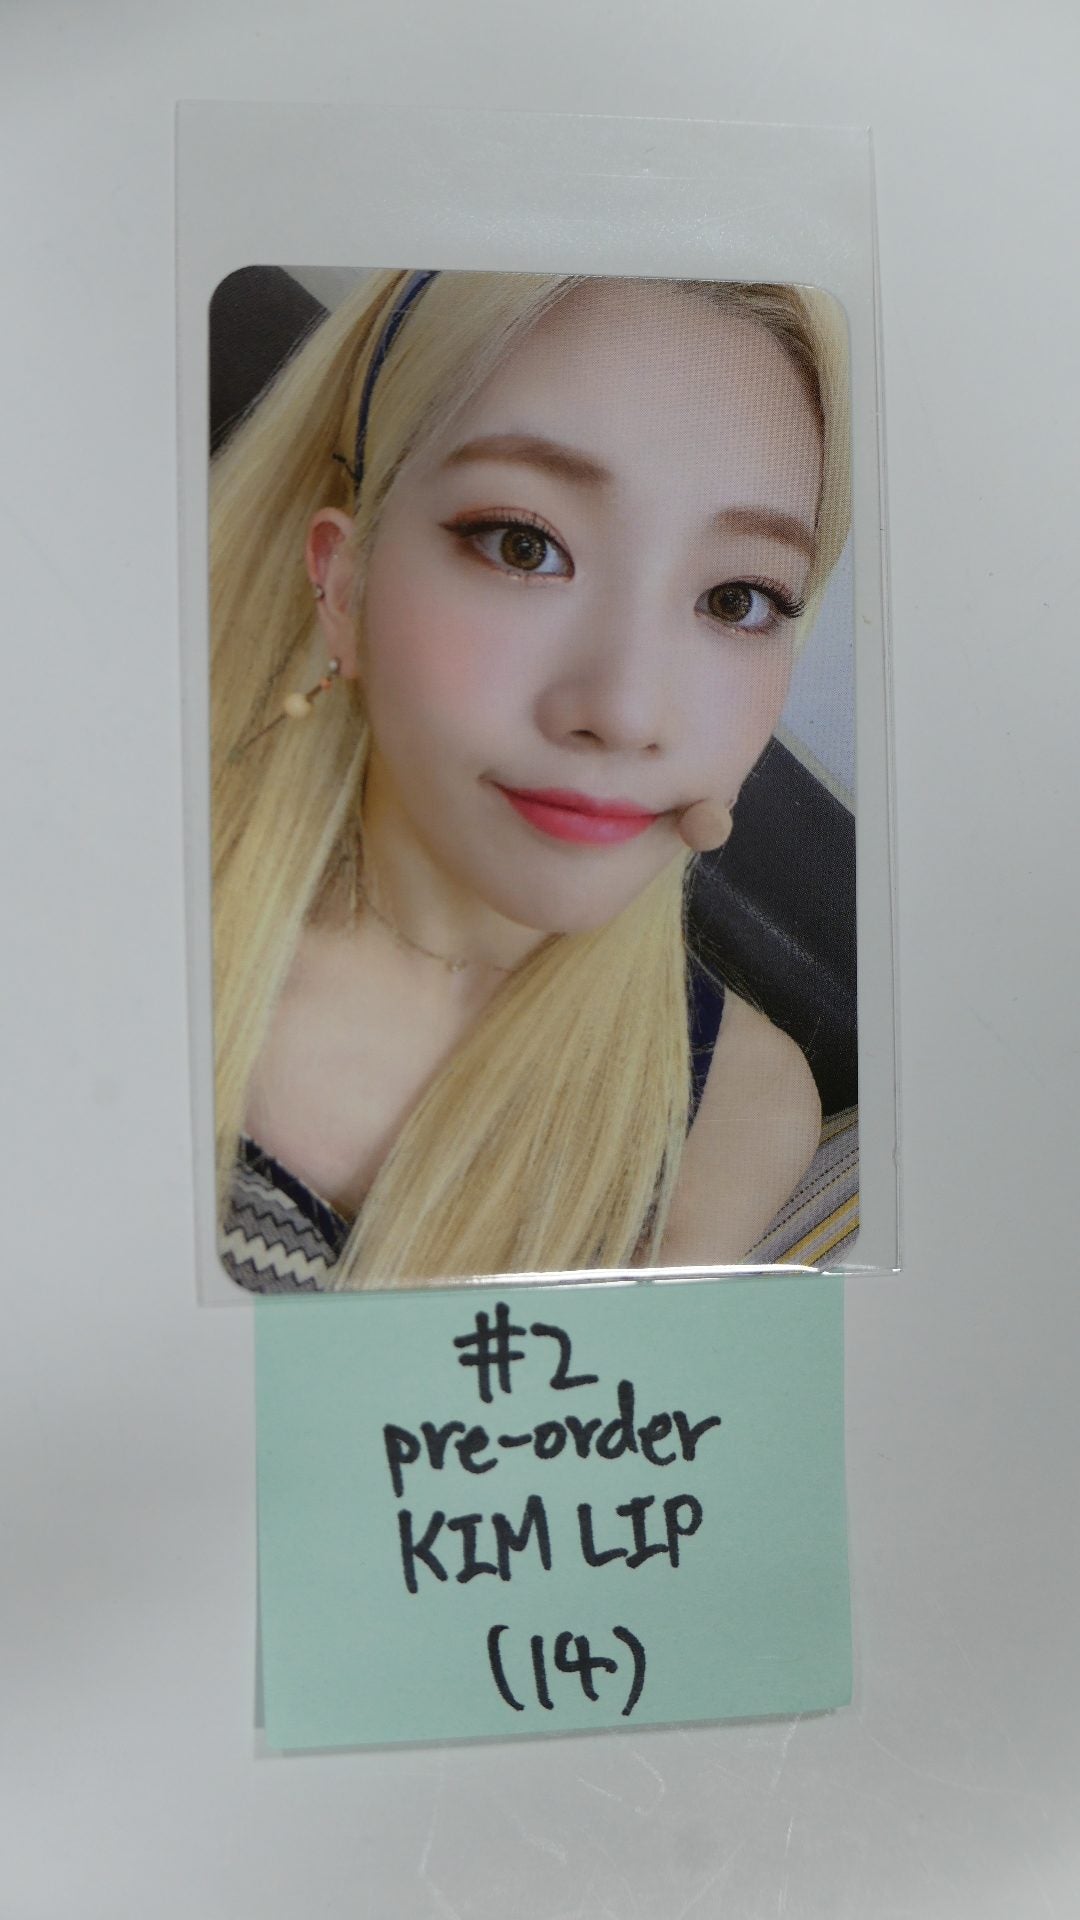 Loona 12:00 - Pre-order (MMT, WithD, Etc) benefit photocard - KimLip